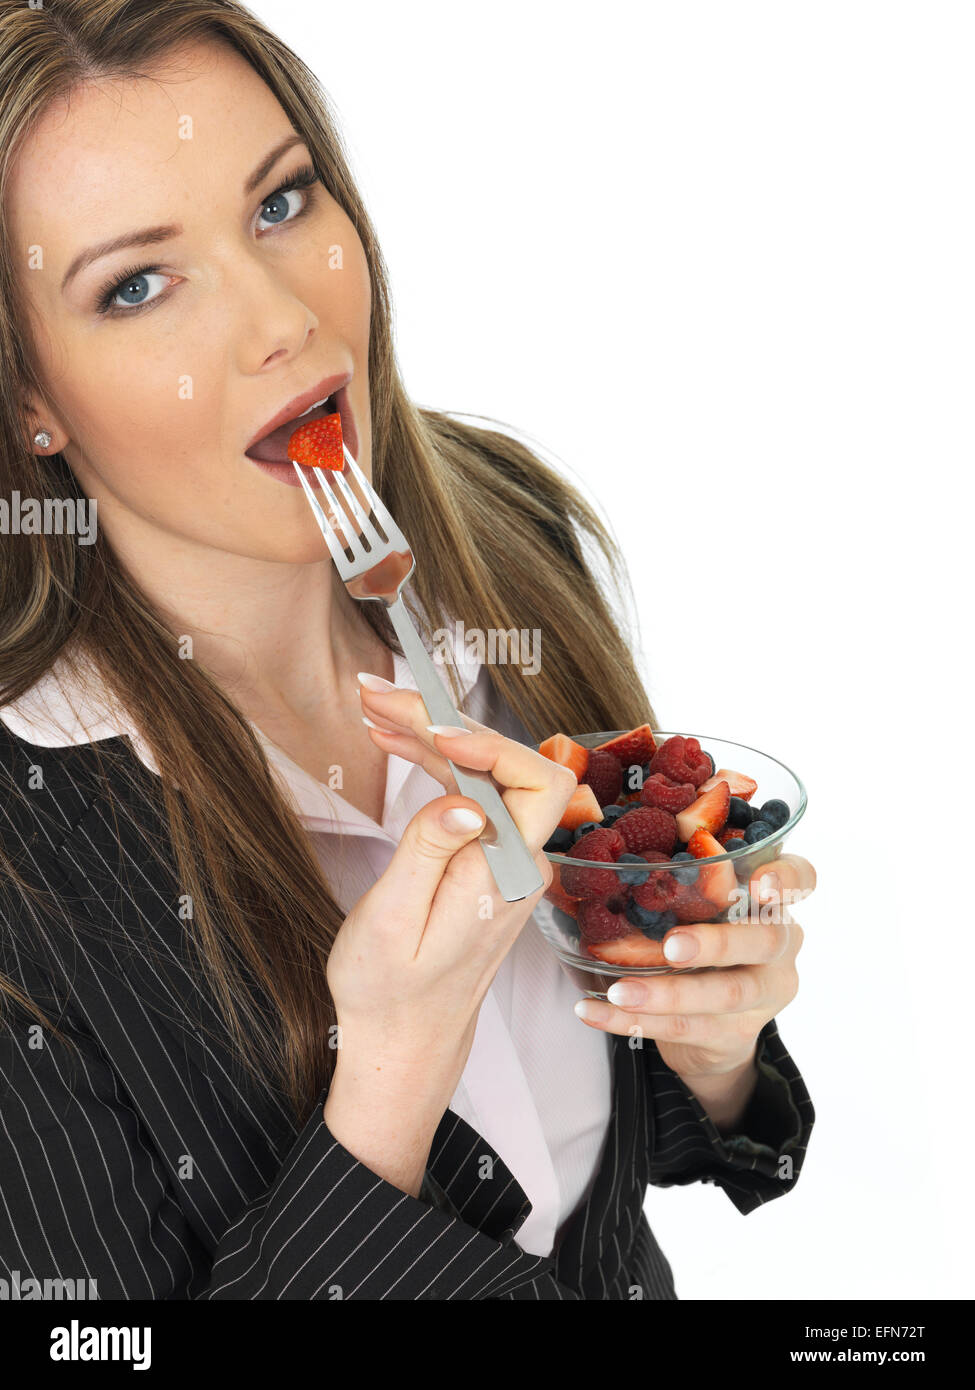 Young Attractive Business Woman Holding a Bowl of Fresh Mixed Berries Stock Photo